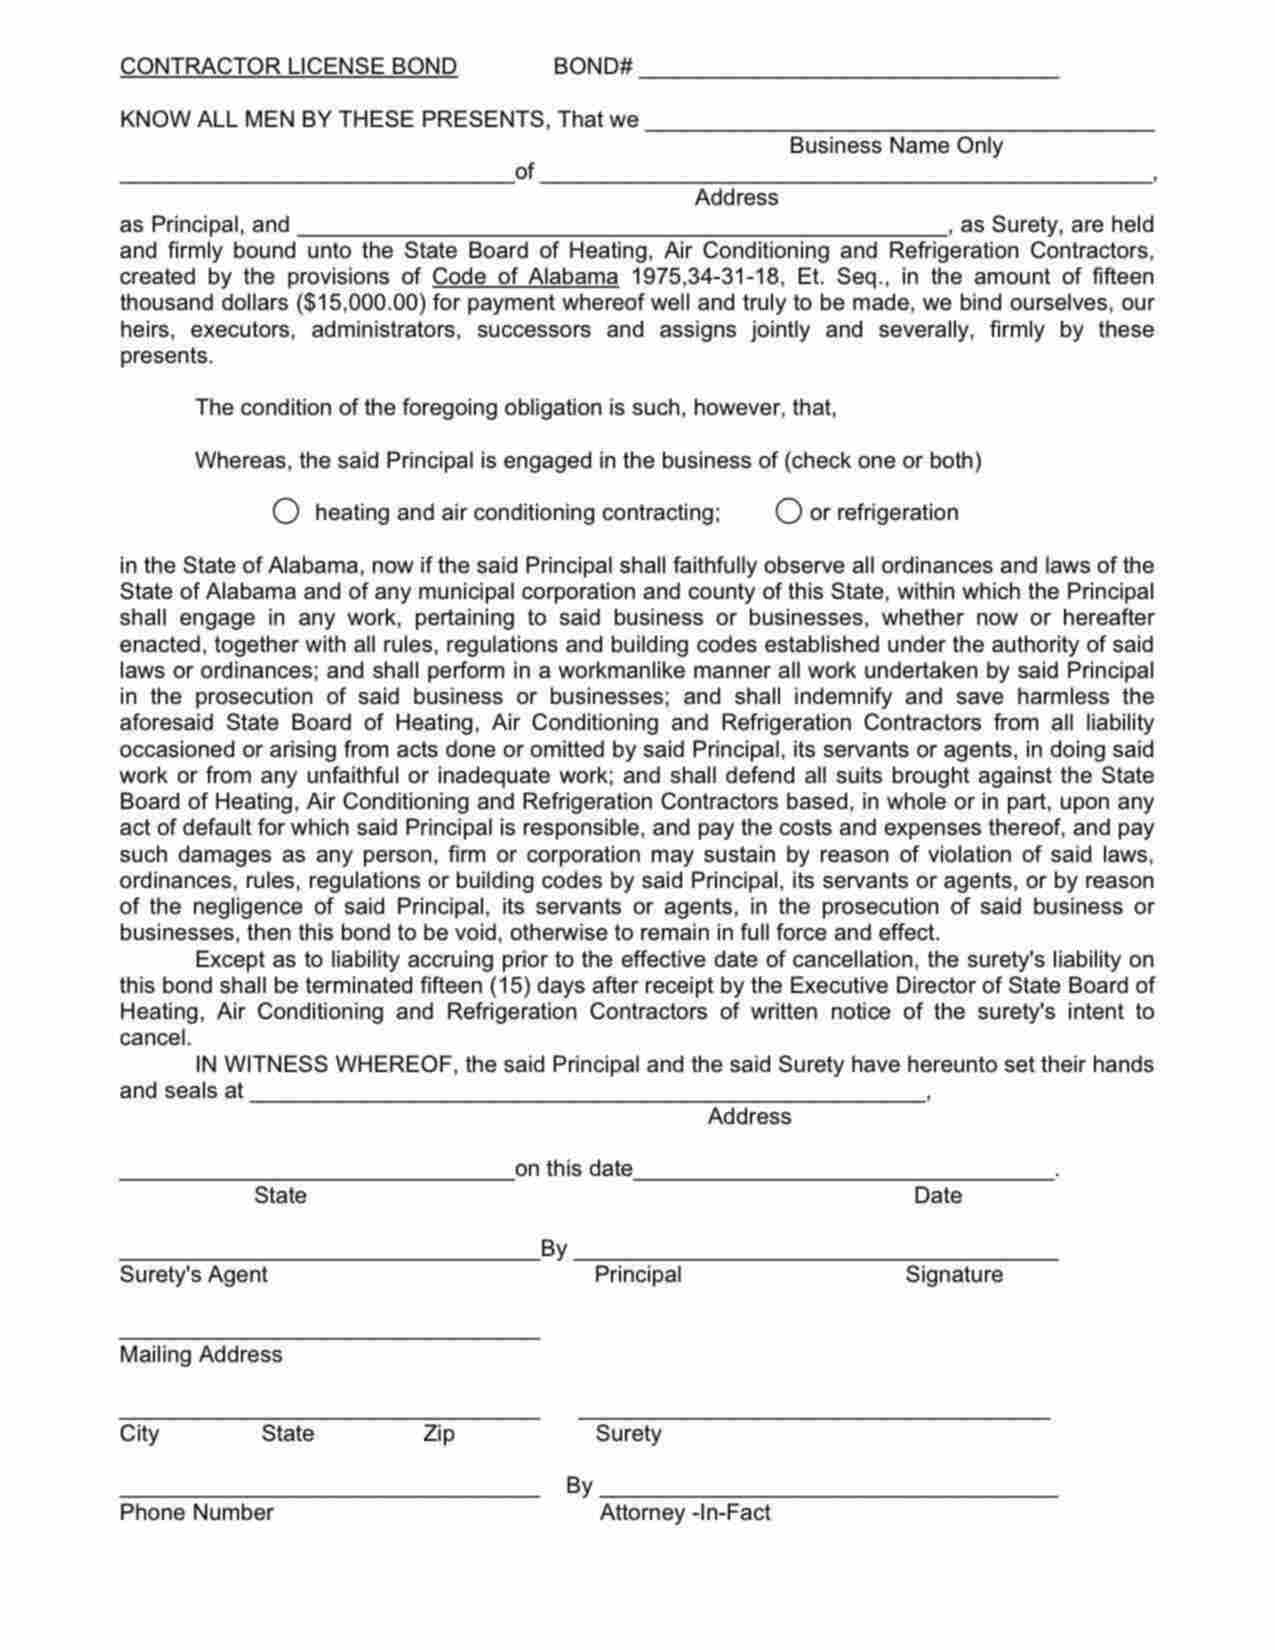 Alabama Heating and Air Conditioning Contractor Bond Form